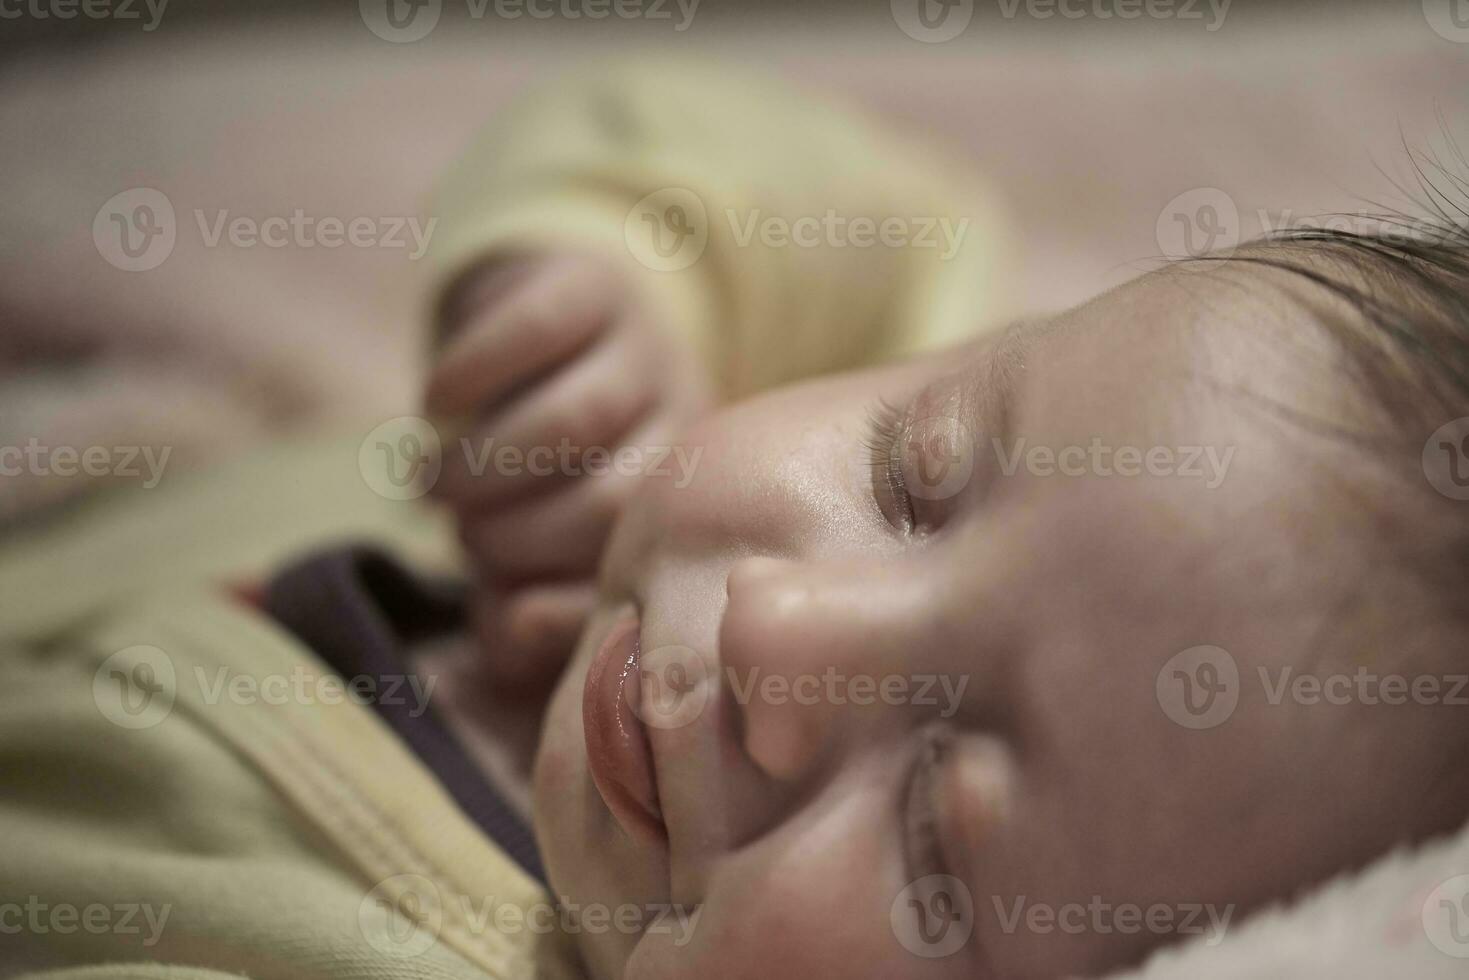 newborn baby sleeping  at home in bed photo